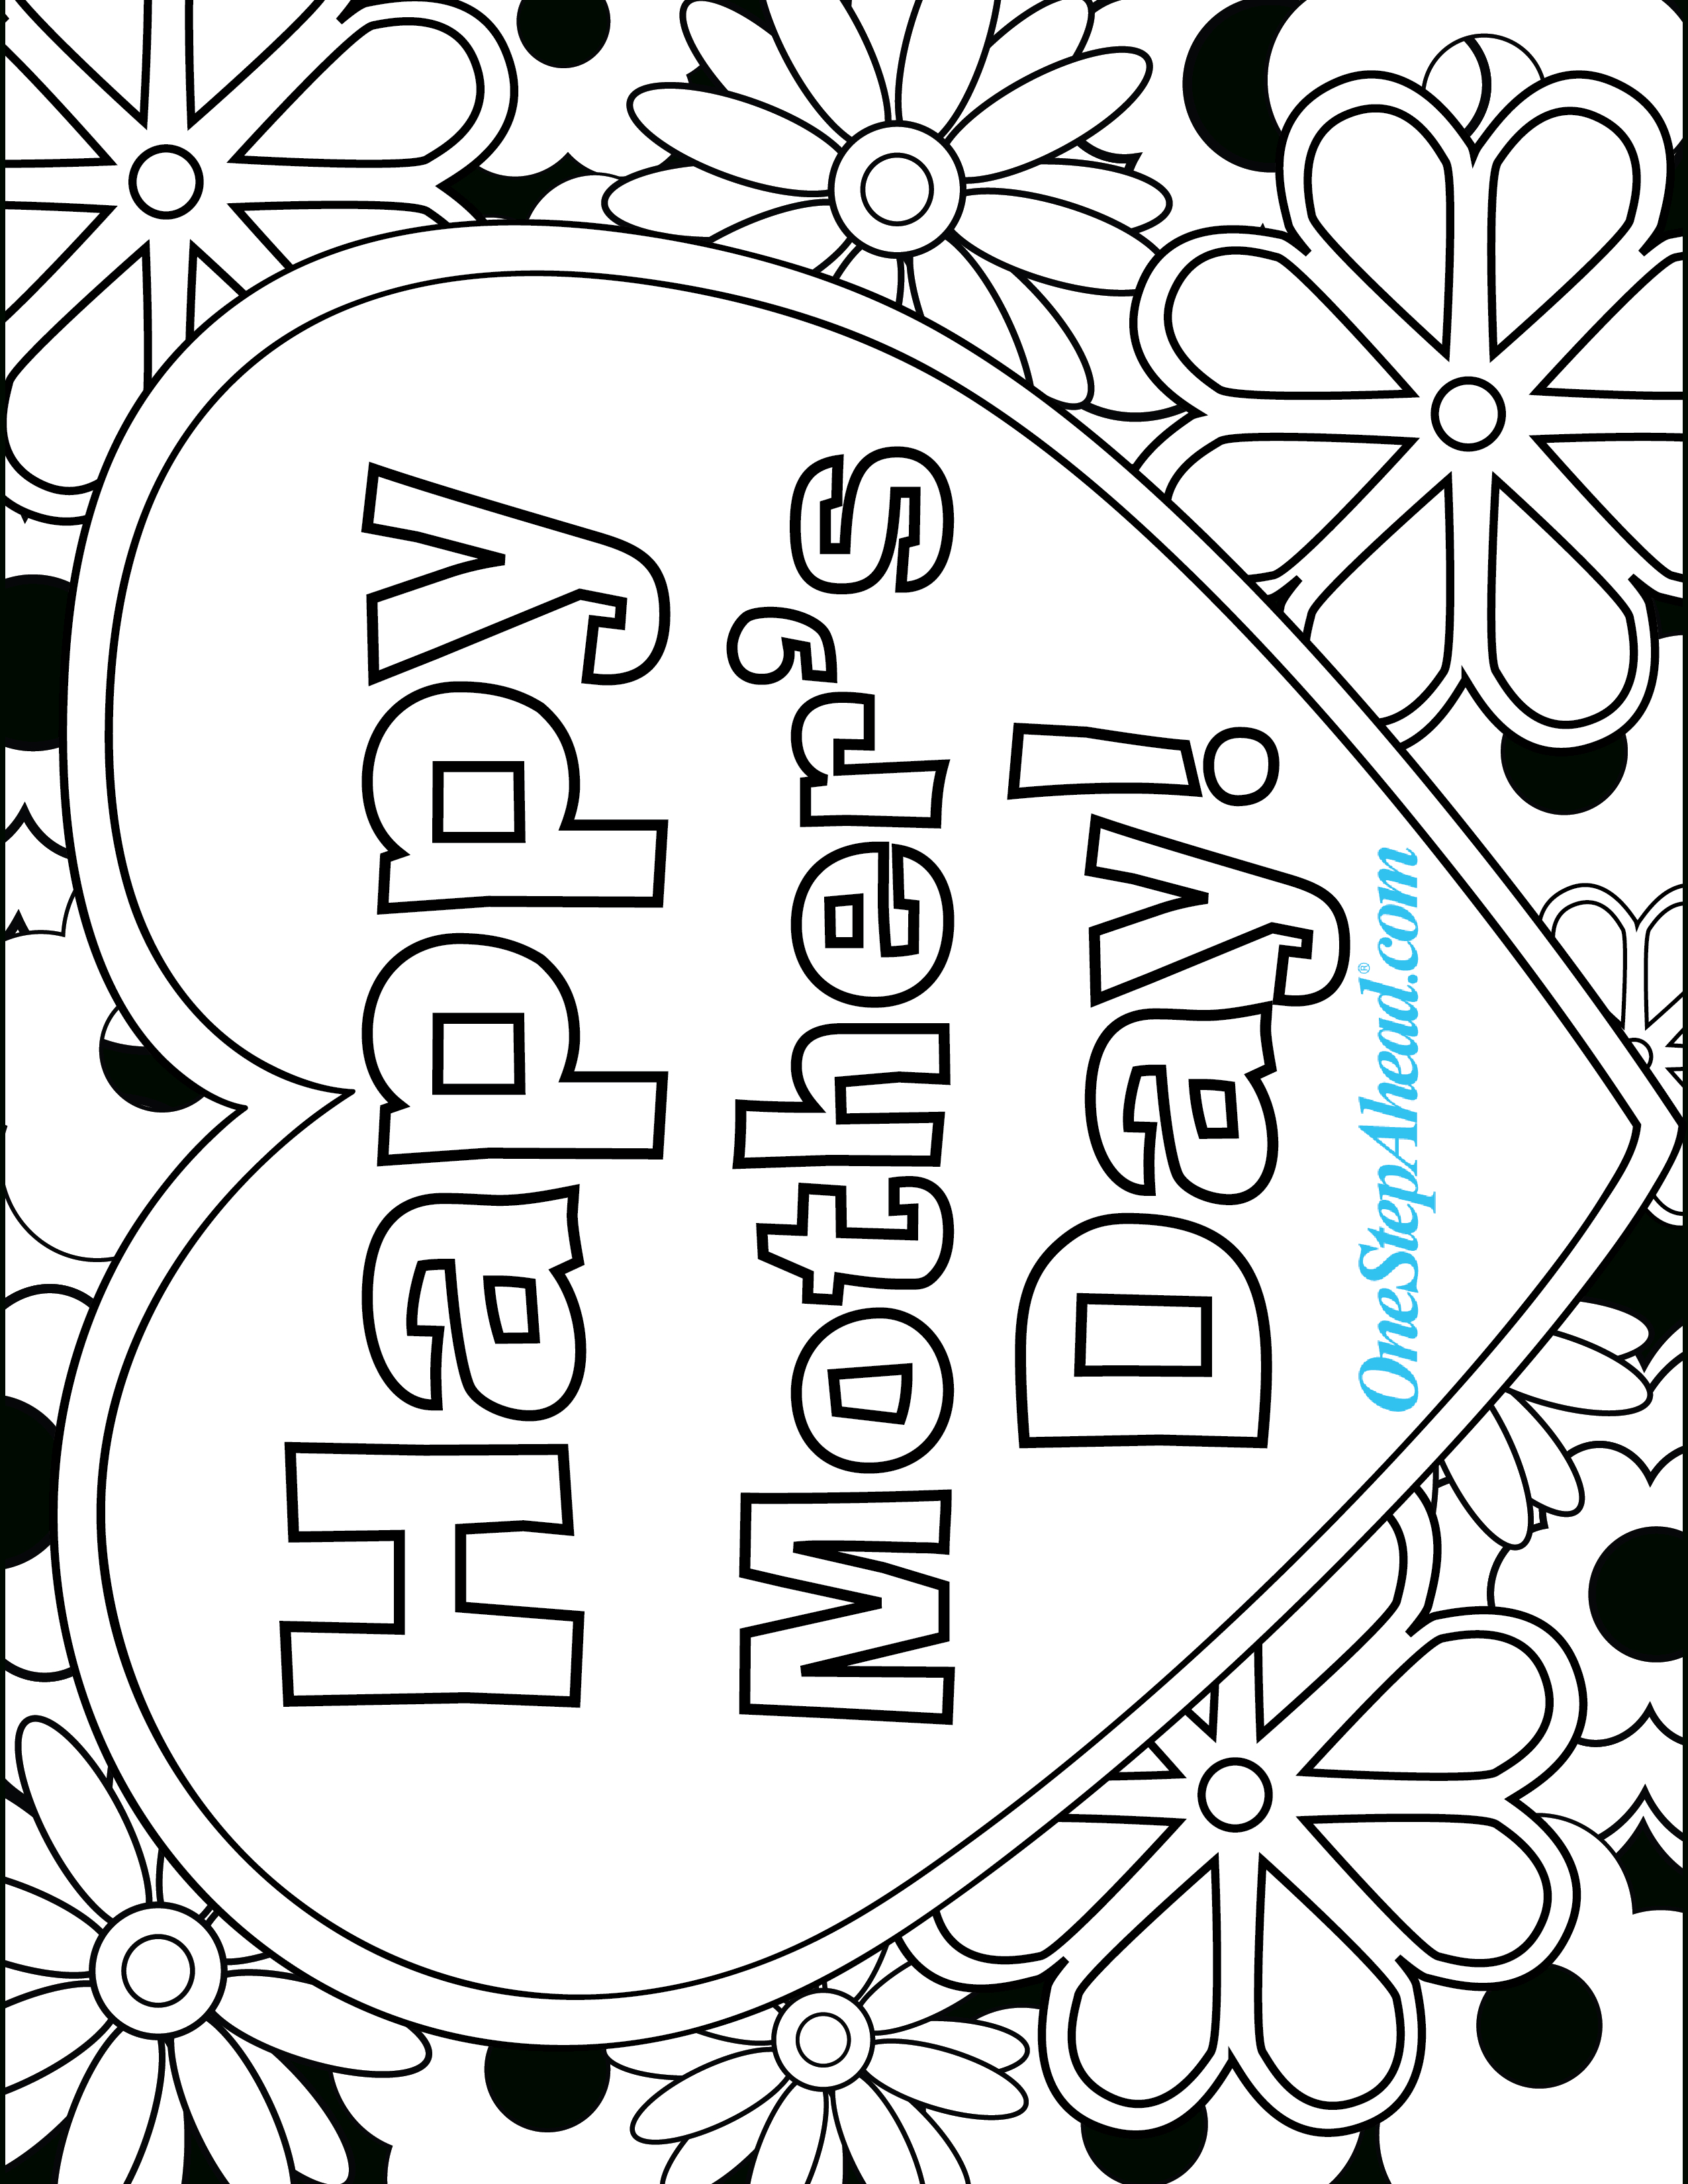 Happy Mother&amp;#039;s Day Free Coloring Page Printable For Kids! | Mother&amp;#039;s - Free Printable Mothers Day Cards Blue Mountain